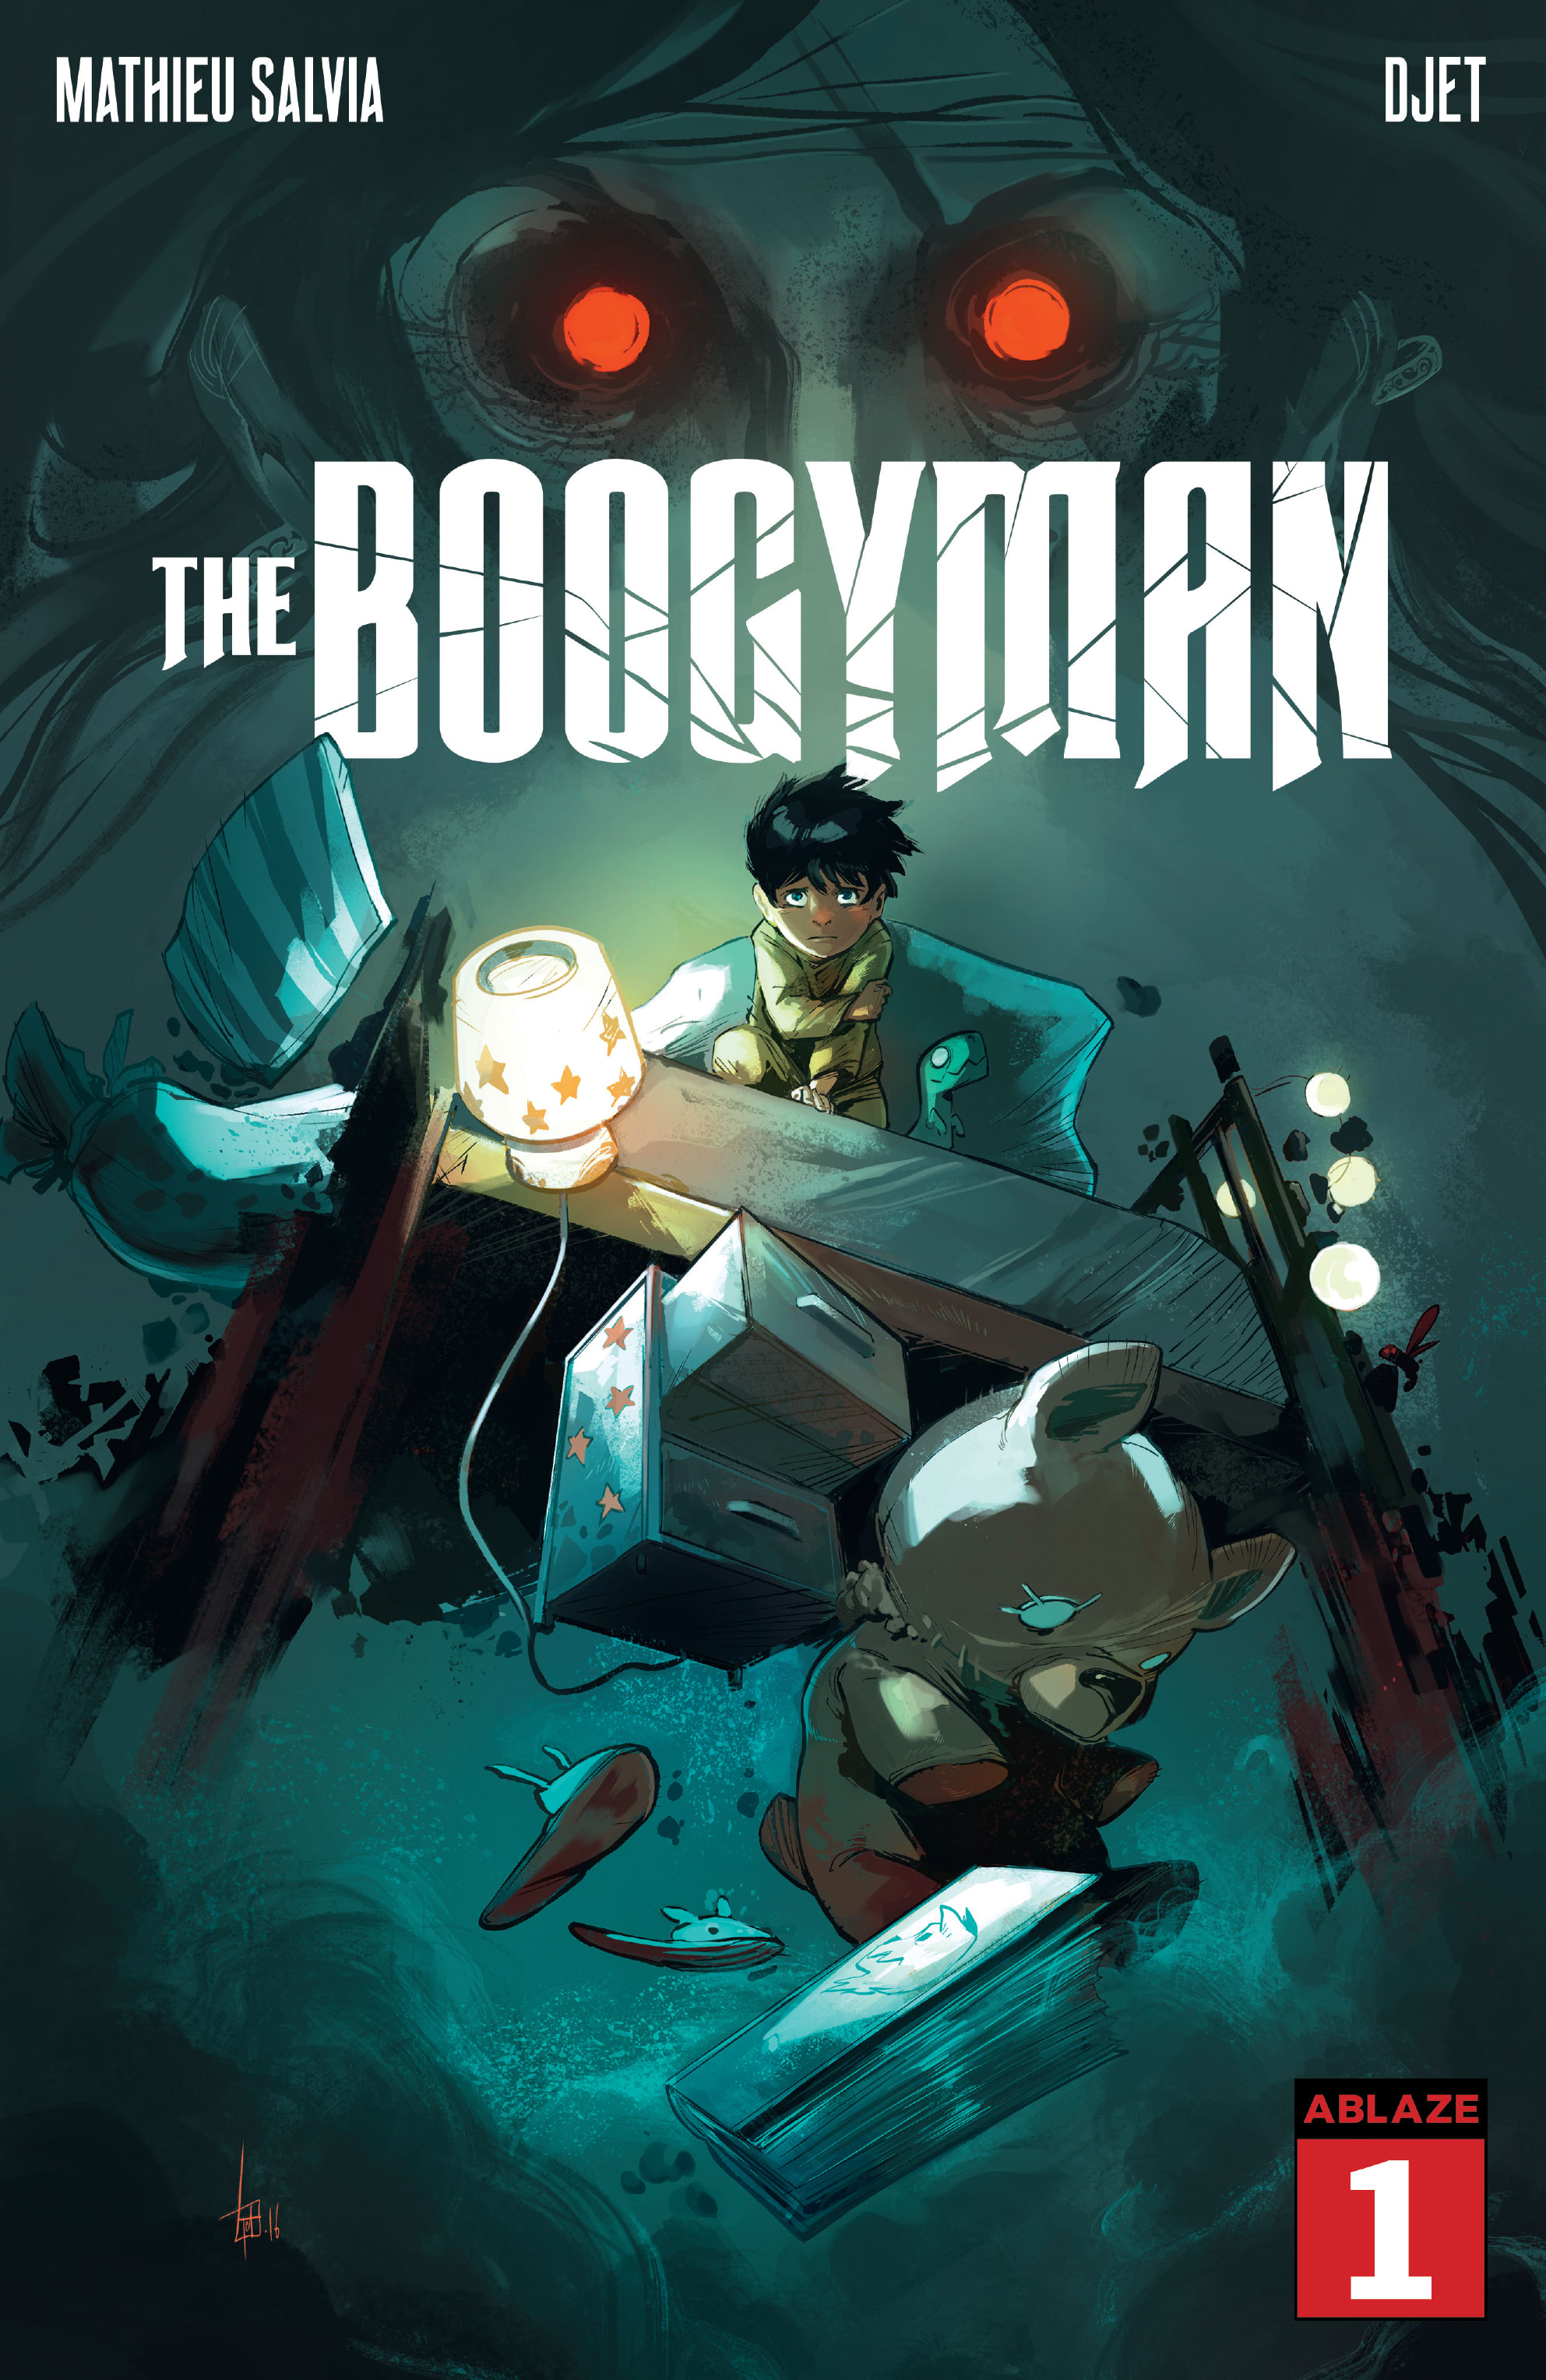 Read online The Boogyman comic -  Issue #1 - 1